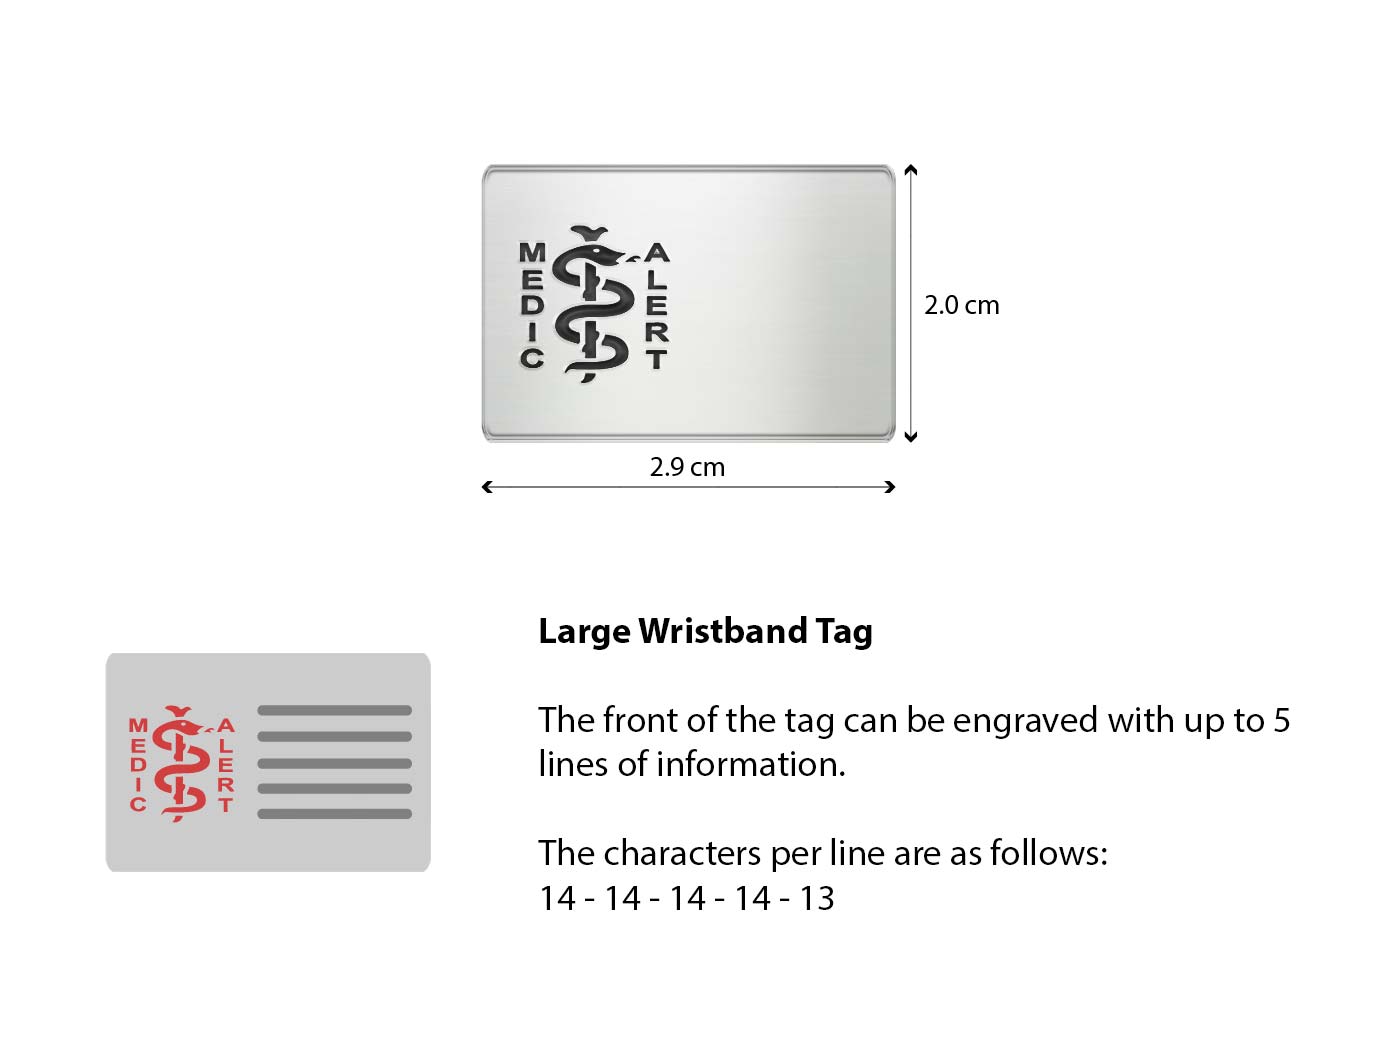 Diagram of the MedicAlert stainless steel large wristband tag disc with measurements and descriptions of the engraving specifications